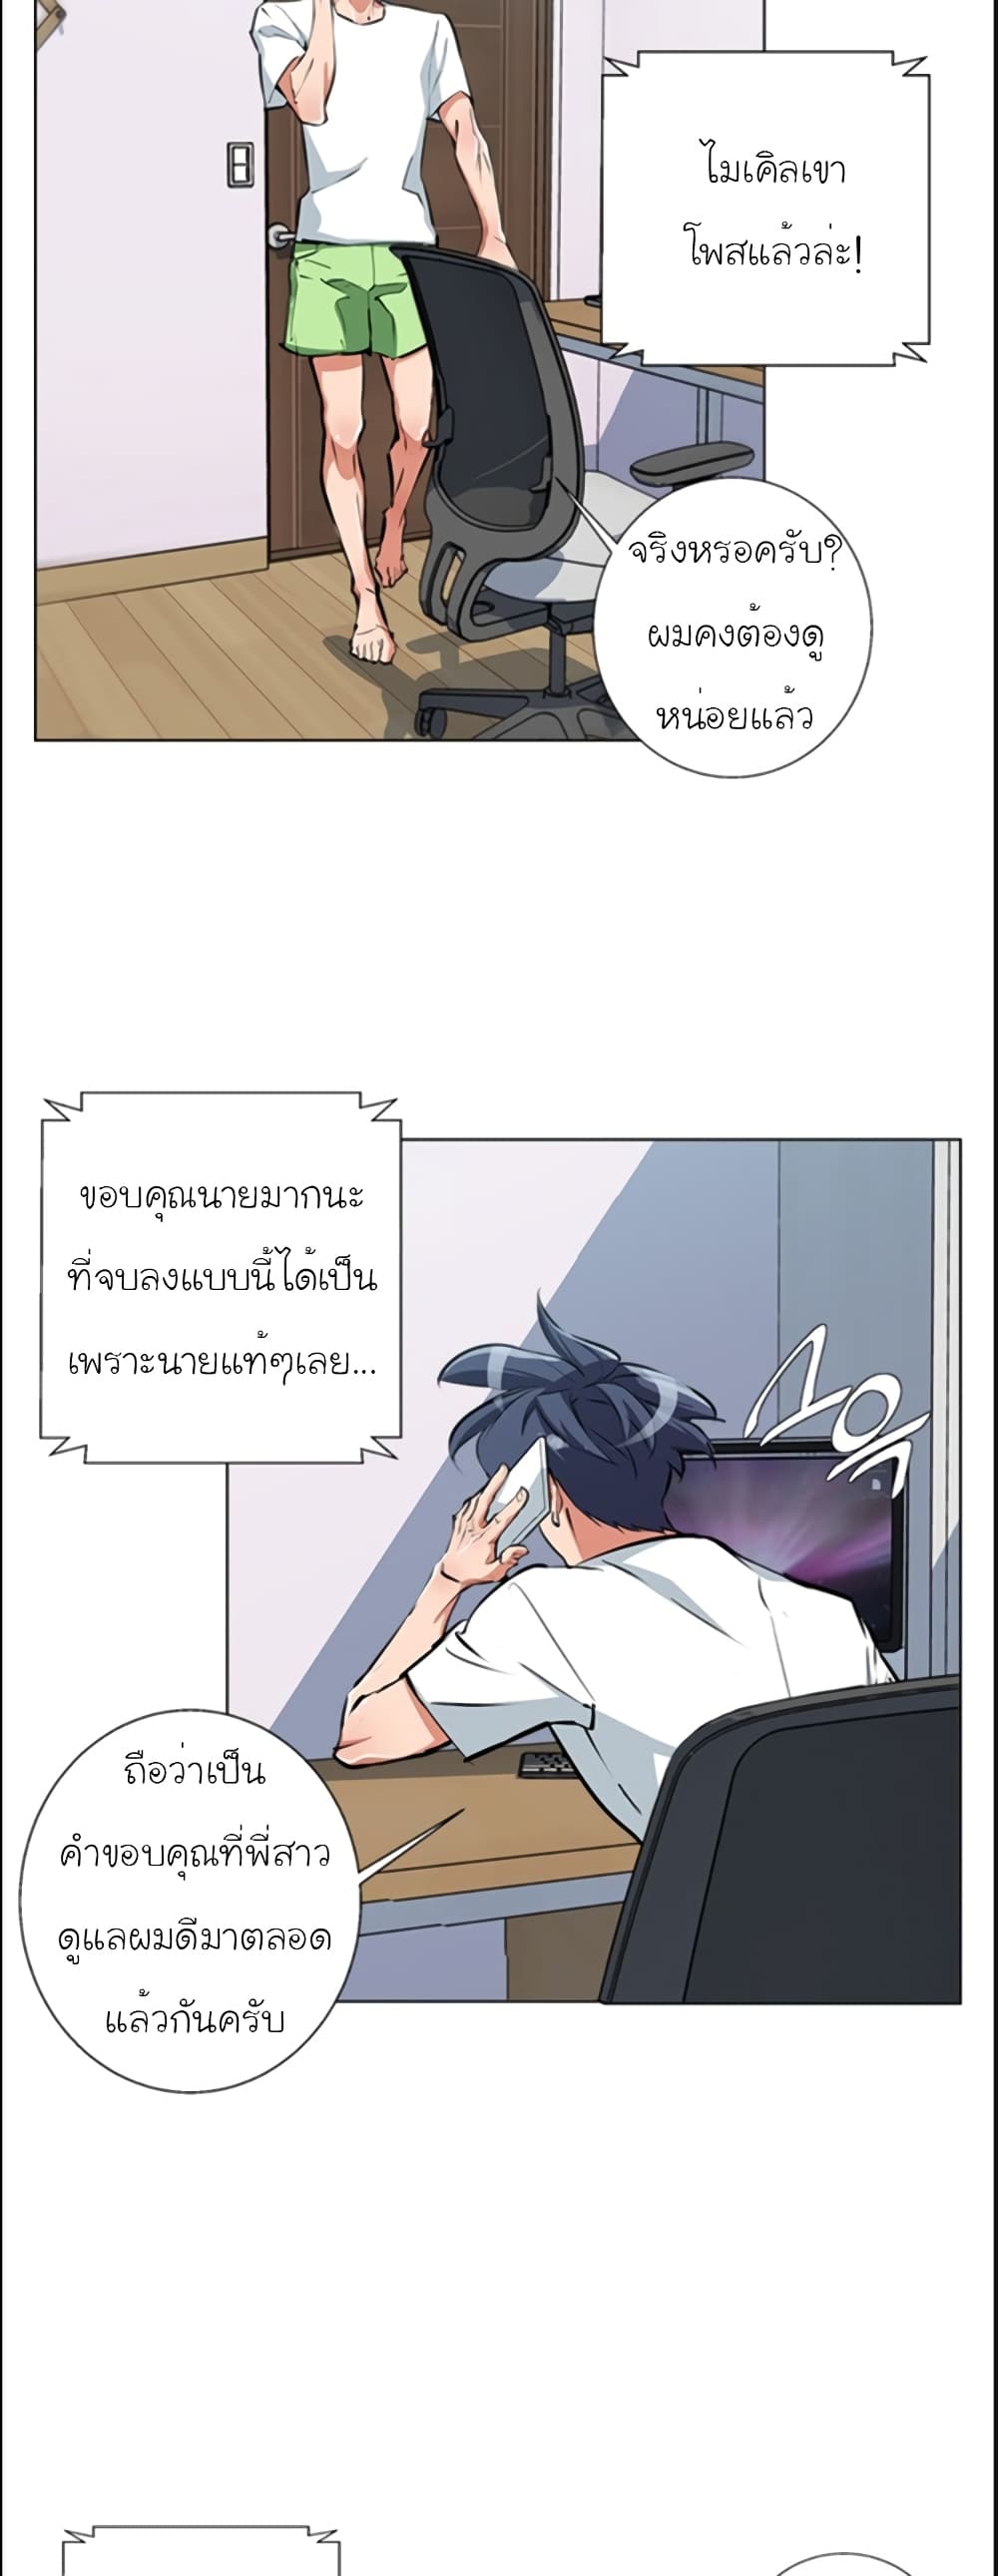 I Stack Experience Through Reading Books ตอนที่ 55 (4)